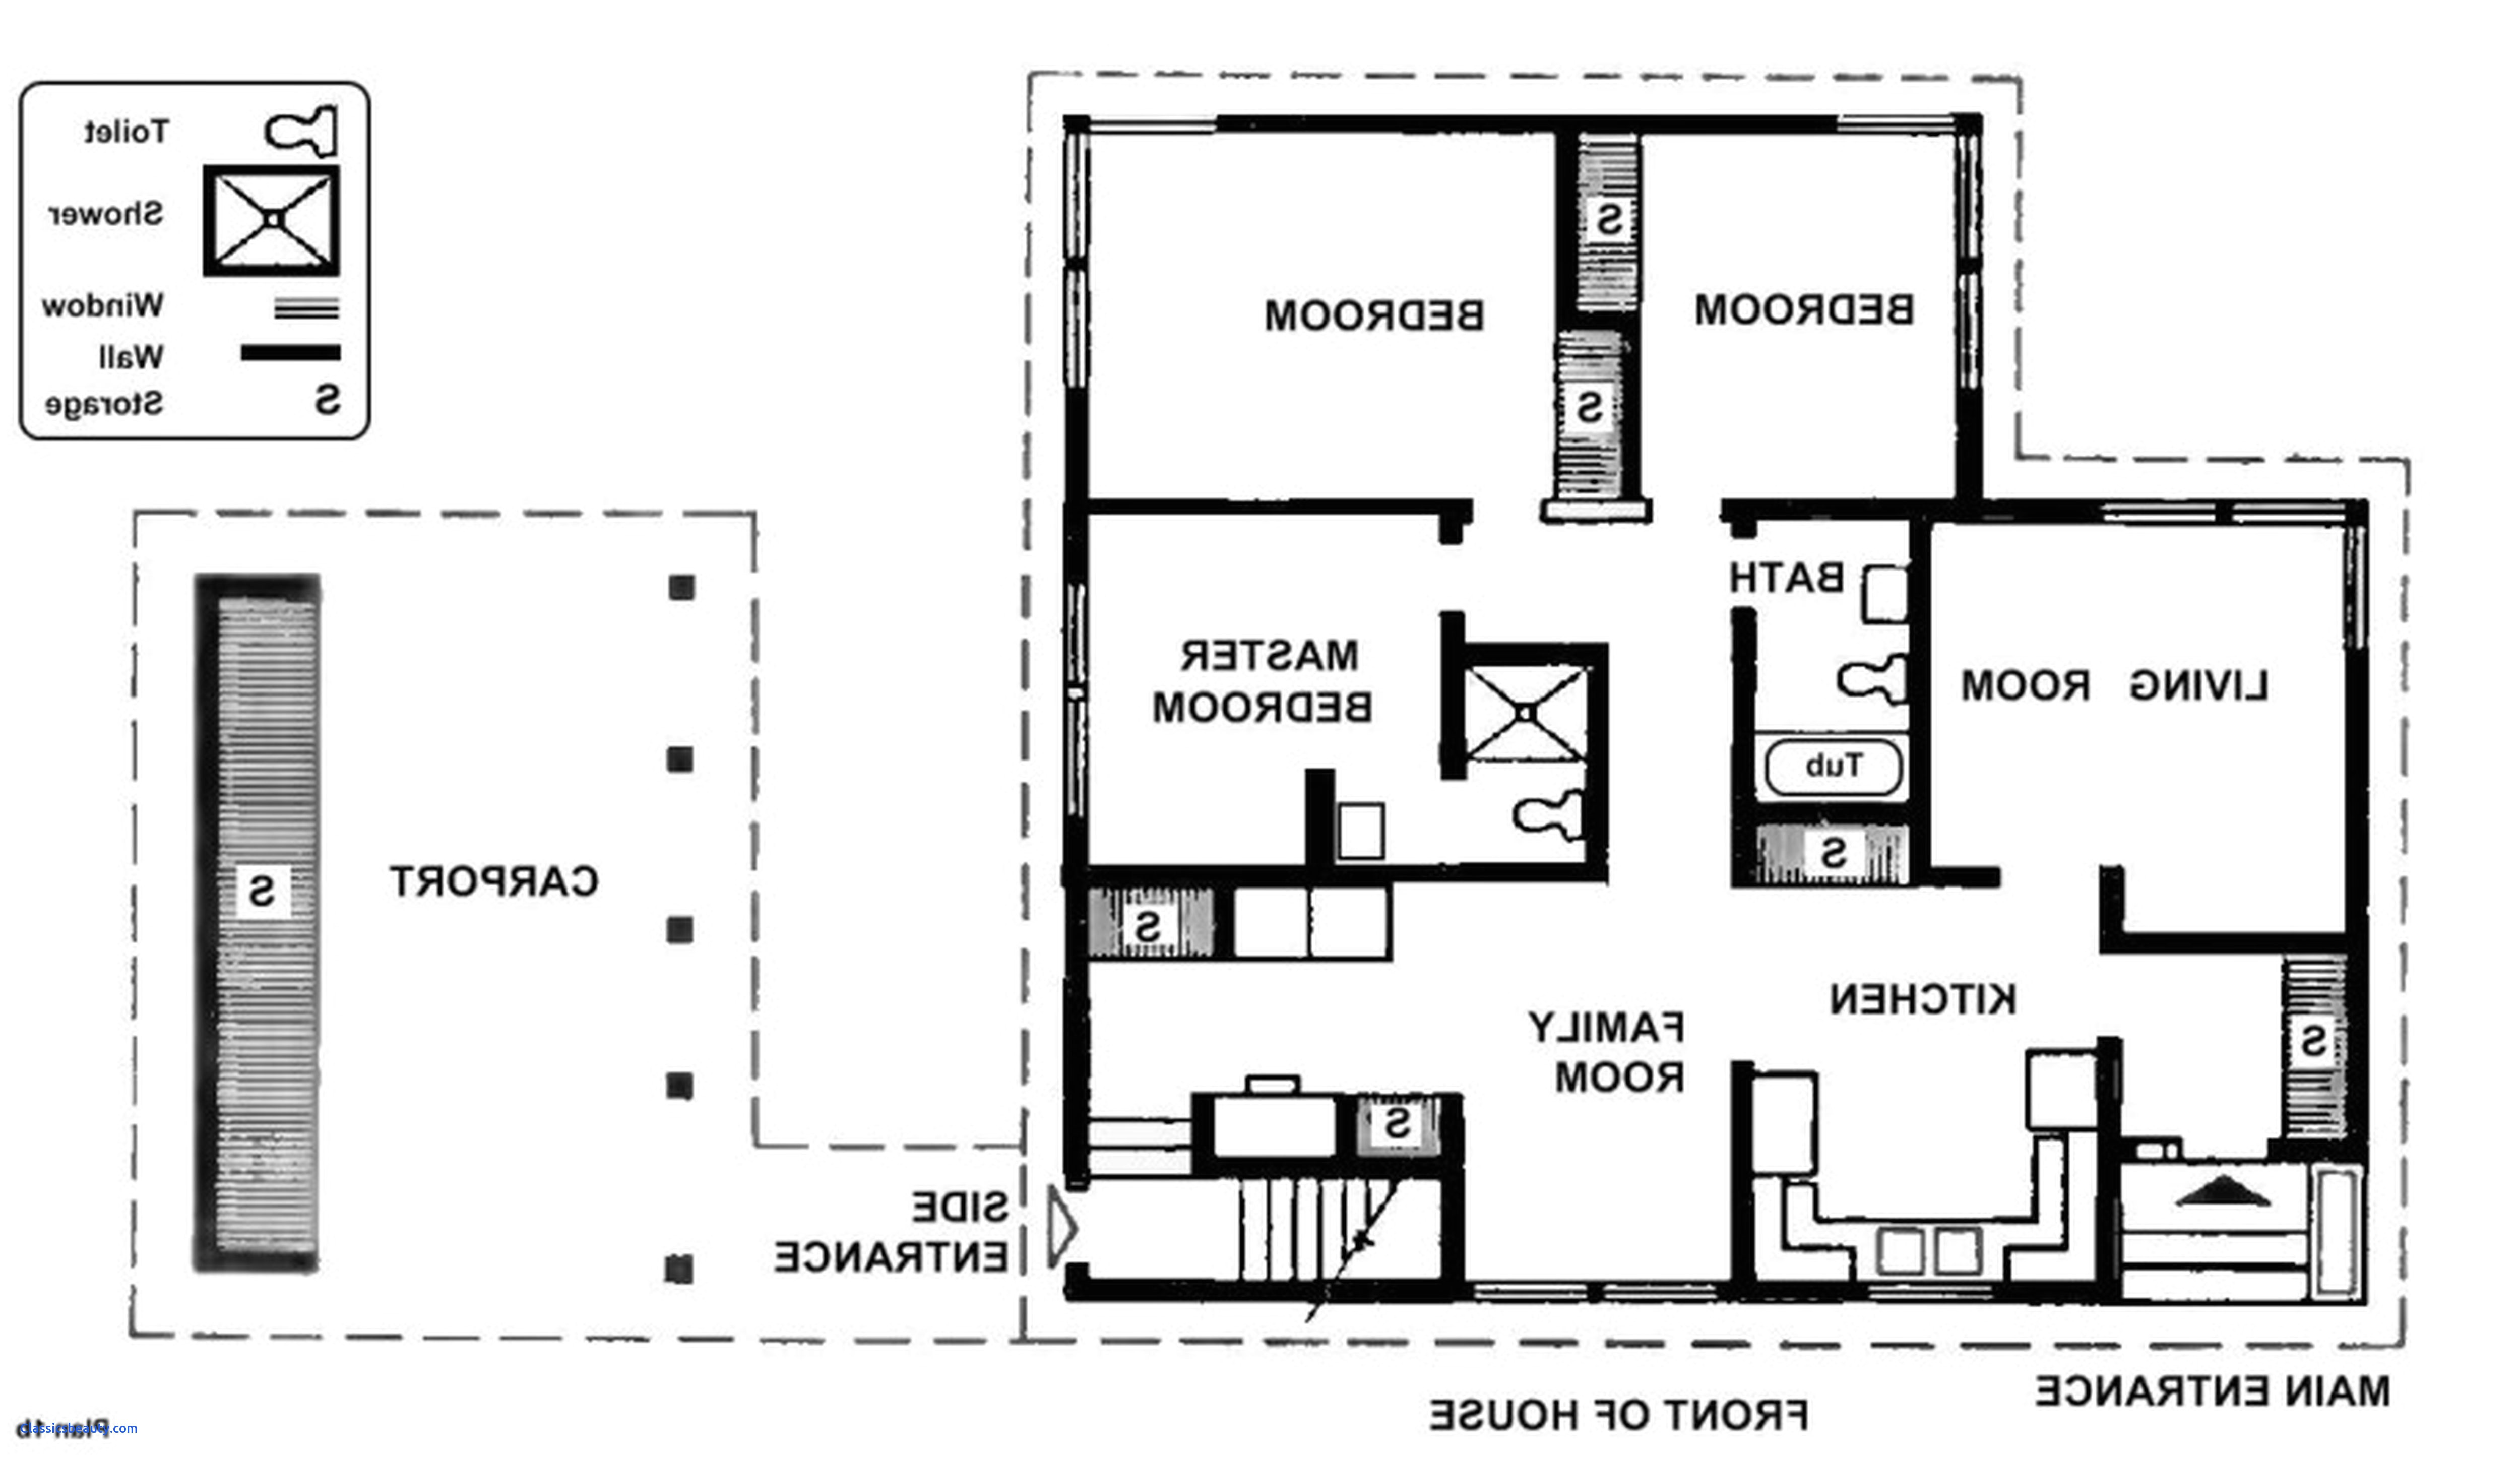 Make Your Own House Plans Online for Free Make My Own House Plans Free